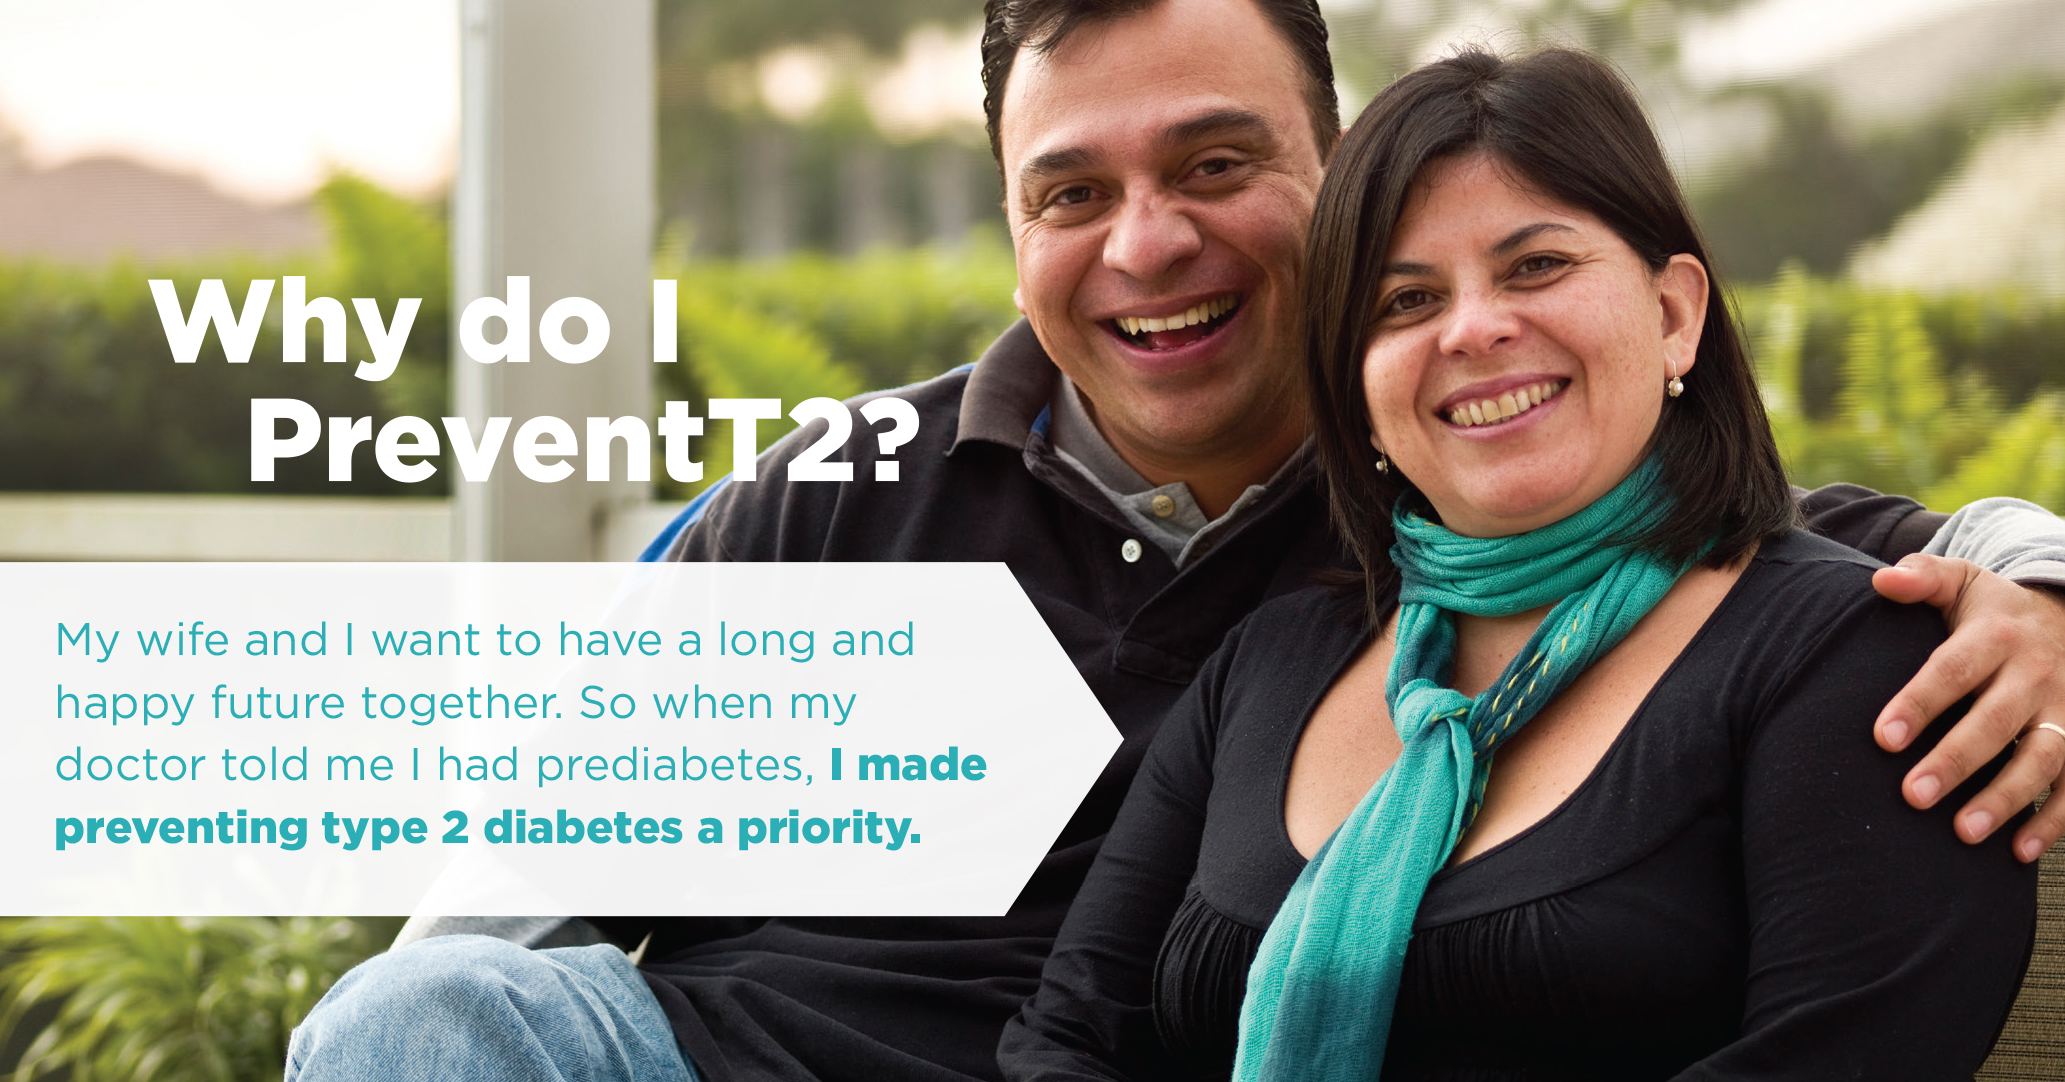 Happy hispanic couple with text reading Why do I prevent T2? My wife and I want to have a long and happy future together. So when my doctor told me I had prediabetes, I made preventing type 2 diabetes a priority.